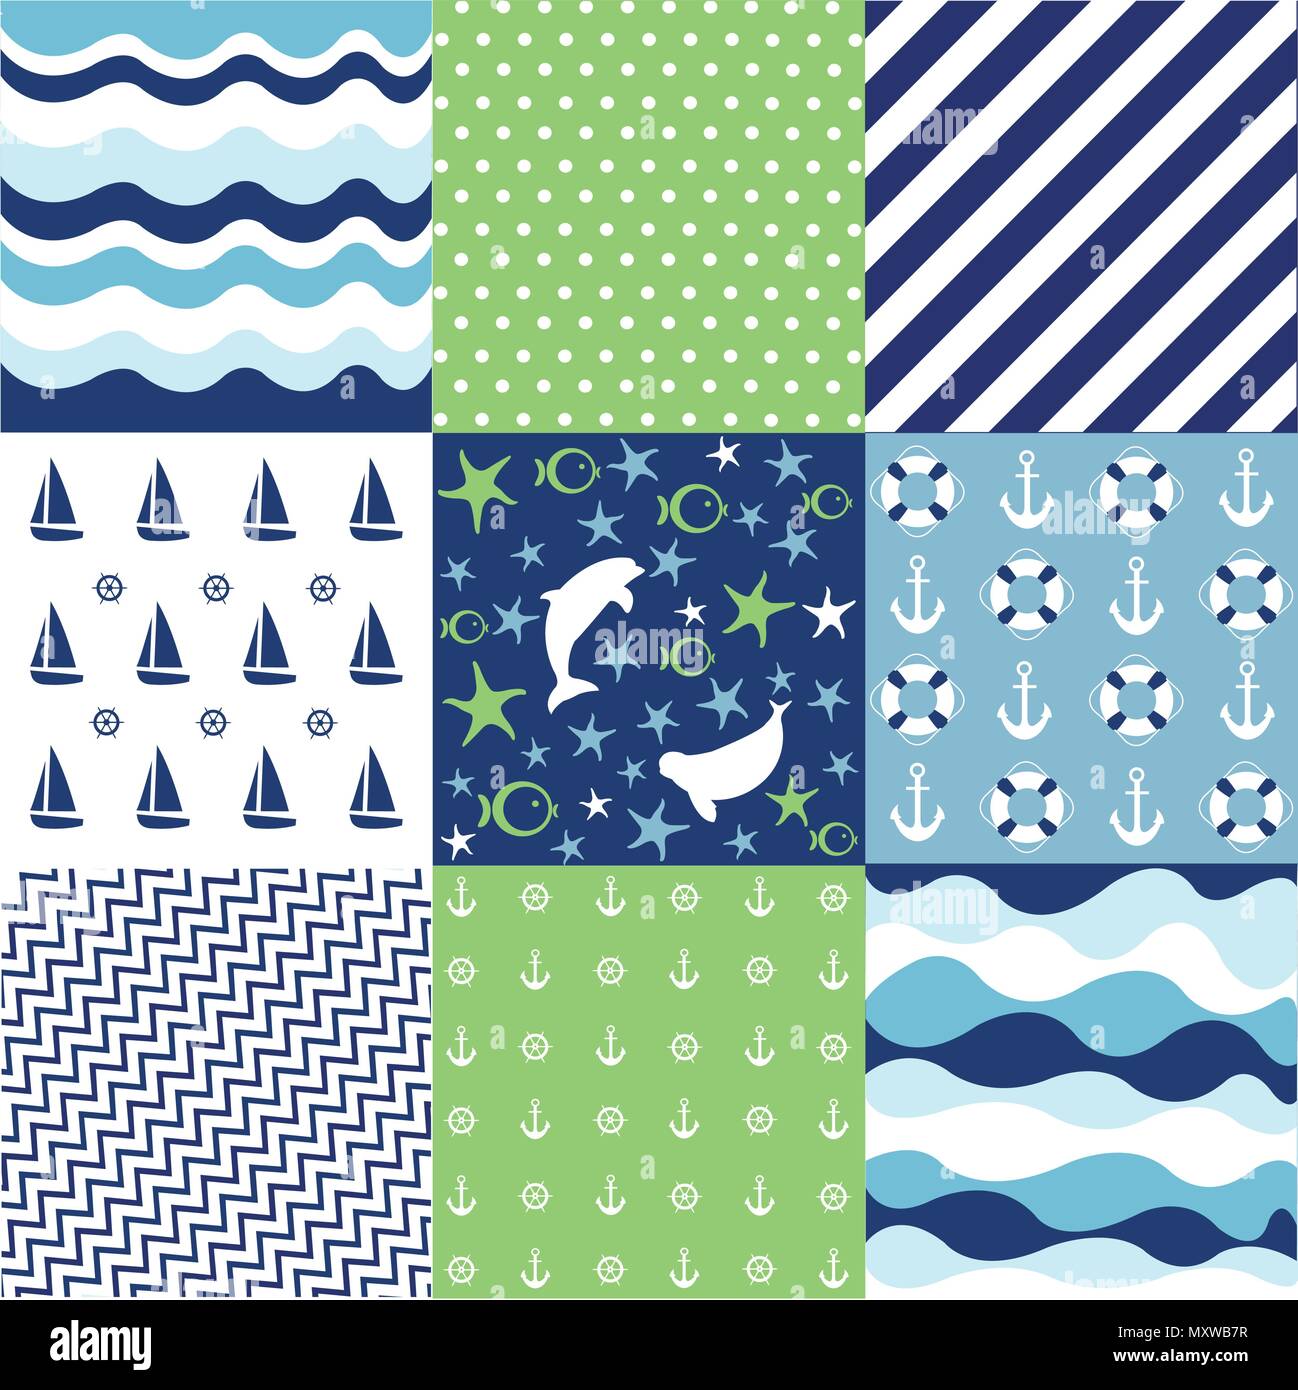 Seamless pattern with nautical elements Stock Vector